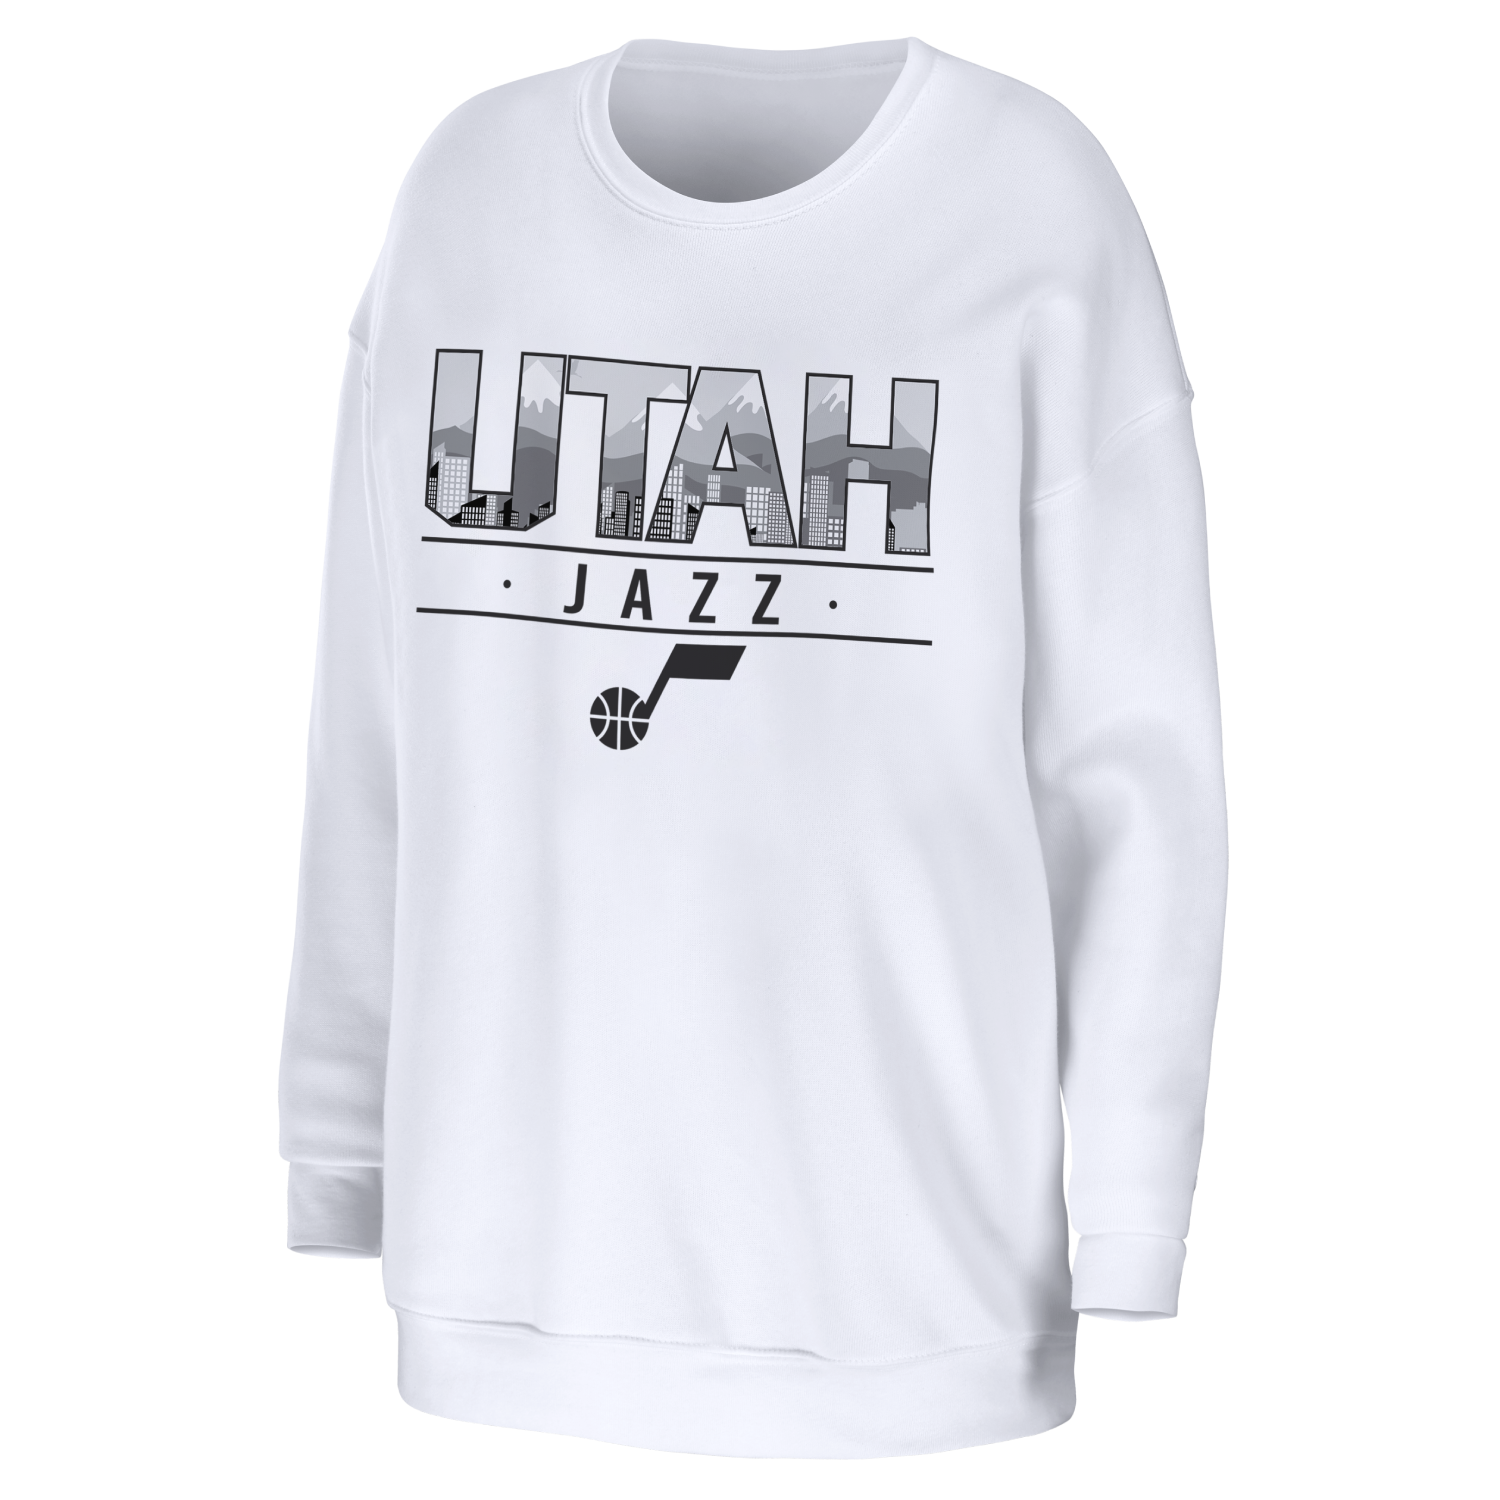 Discounted Women's Utah Jazz Gear, Cheap Womens Jazz Apparel, Clearance  Ladies Jazz Outfits